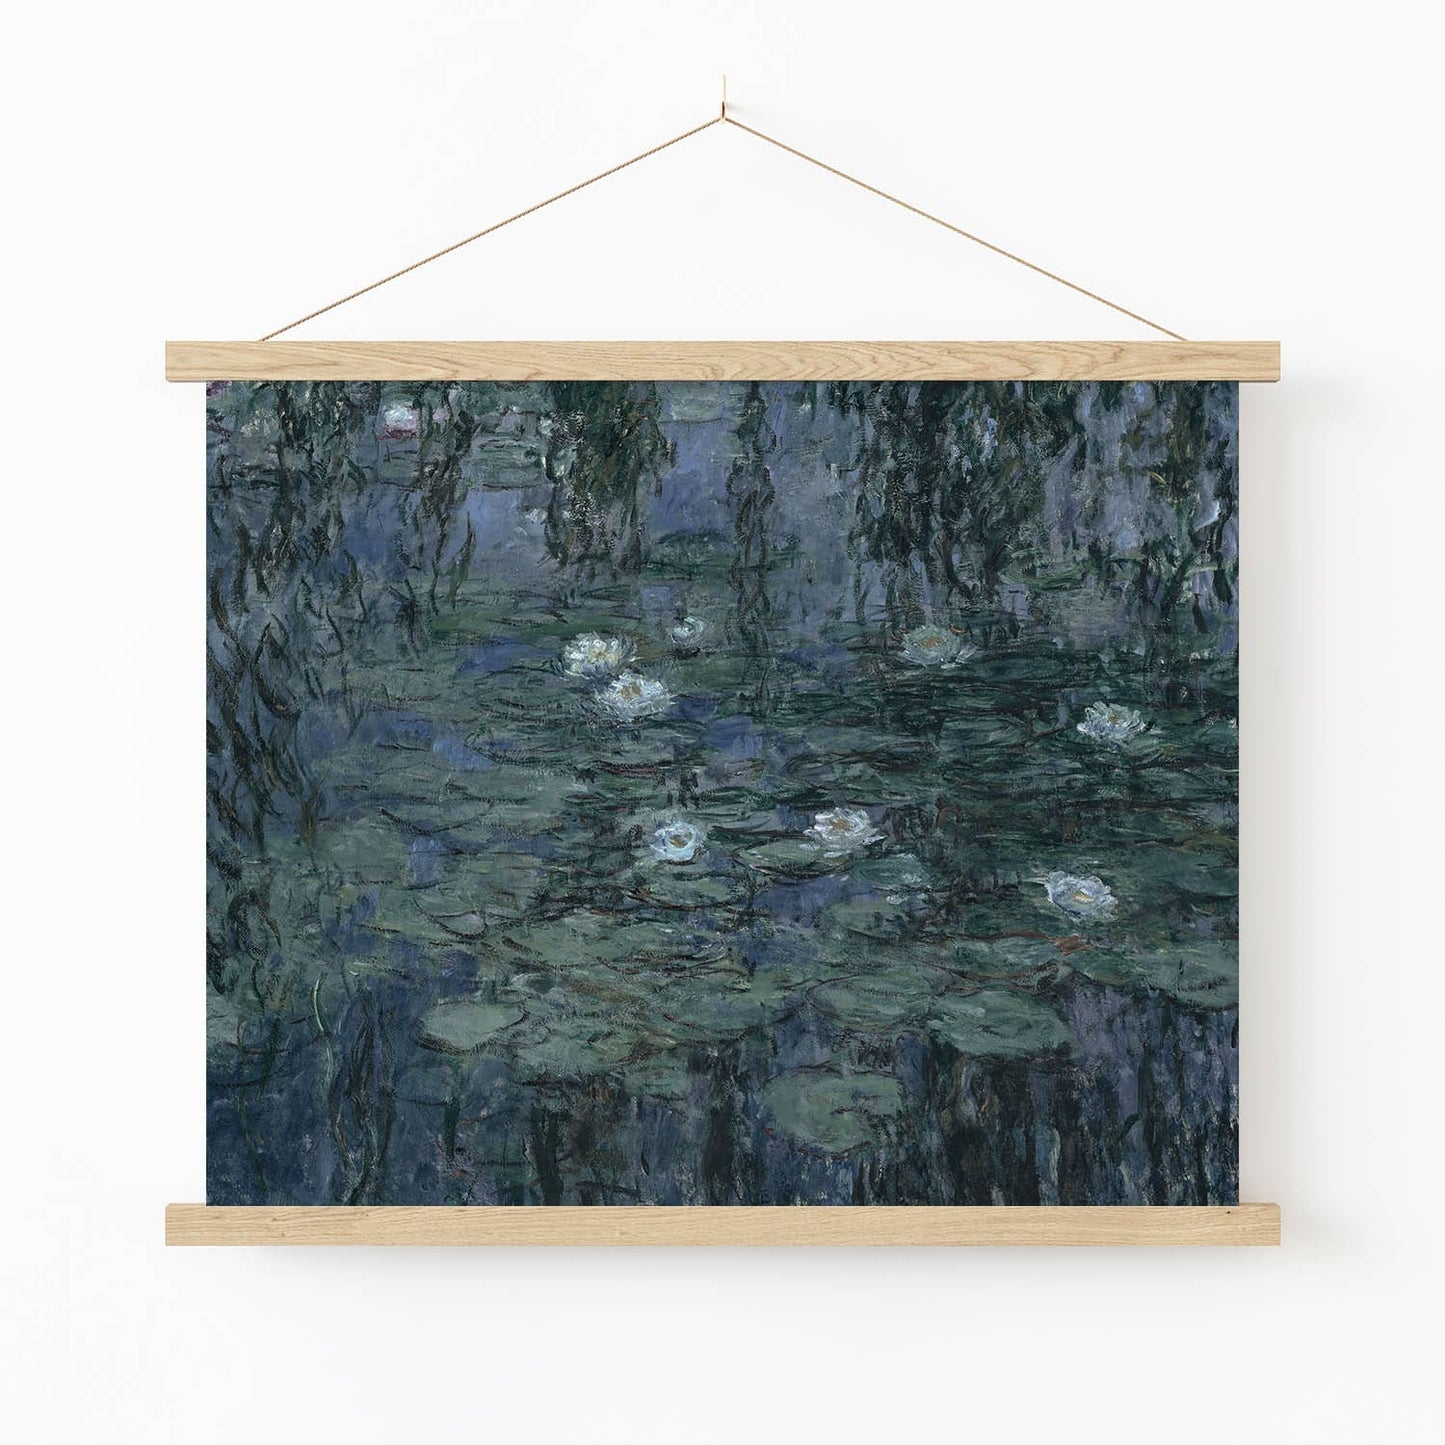 Relaxing Abstract Art Print in Wood Hanger Frame on Wall